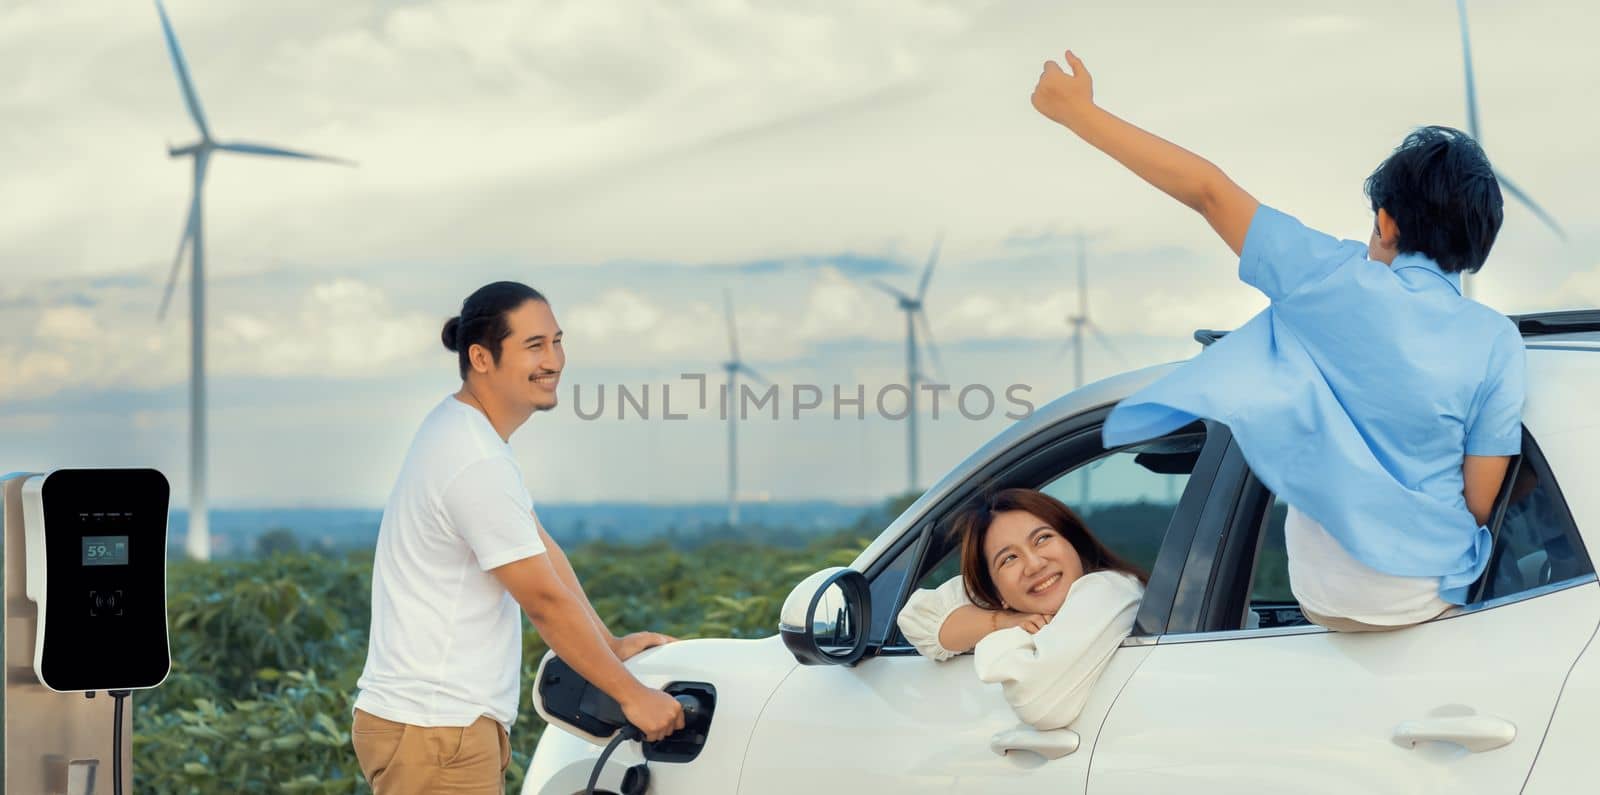 Concept of progressive happy family at wind farm with electric vehicle. by biancoblue